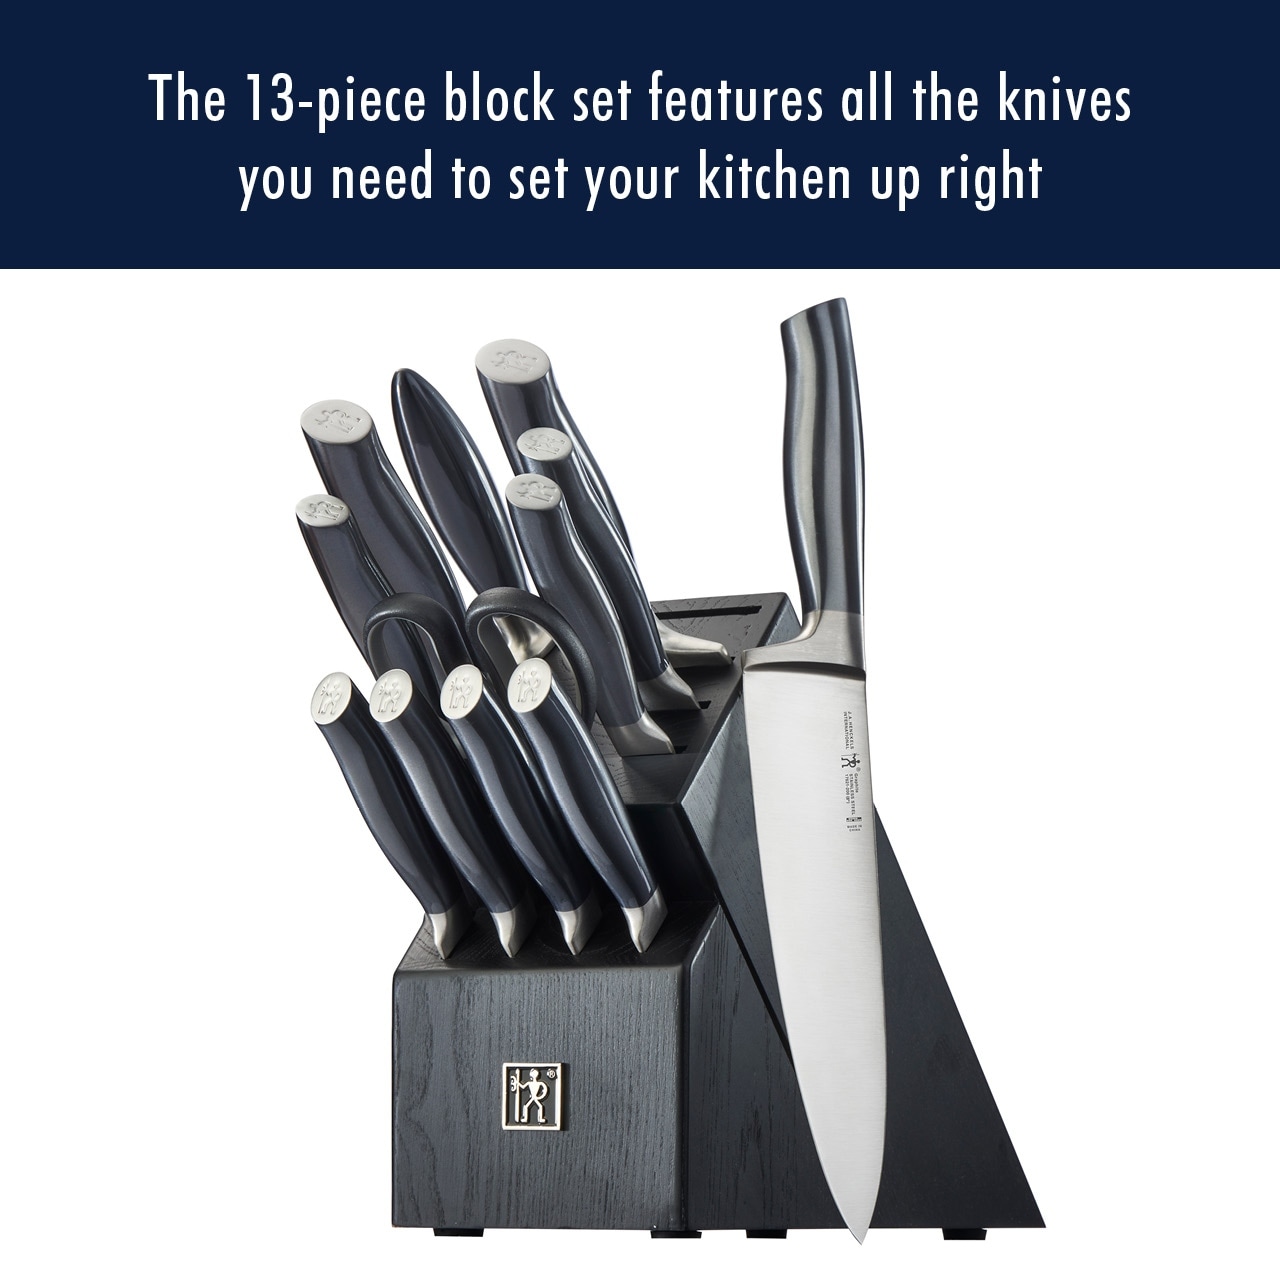 https://ak1.ostkcdn.com/images/products/is/images/direct/78c5248ac6fcbcf5f9e90d1106cc774c7b65f551/HENCKELS-Graphite-13-pc-Knife-Set-with-Block%2C-Kitchen-Knife-Sharpener%2C-Chef-Knife%2C-Steak-Knife%2C-Black%2C-Stainless-Steel.jpg